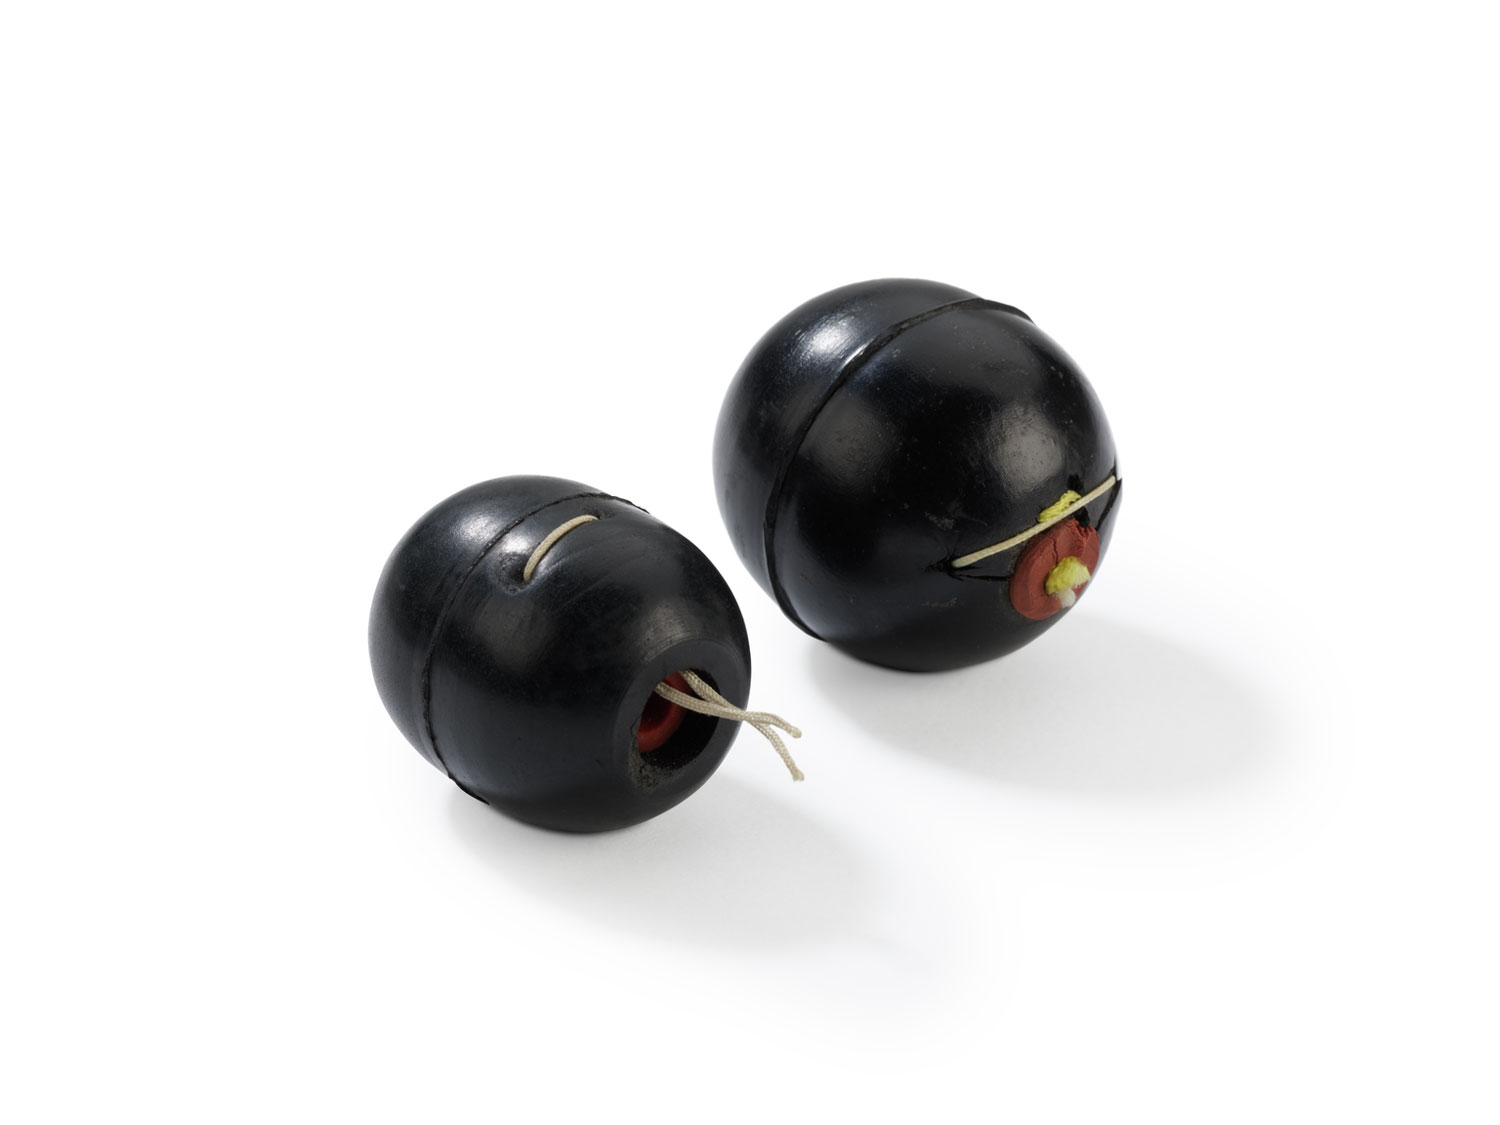 Two small black spherical medical devices